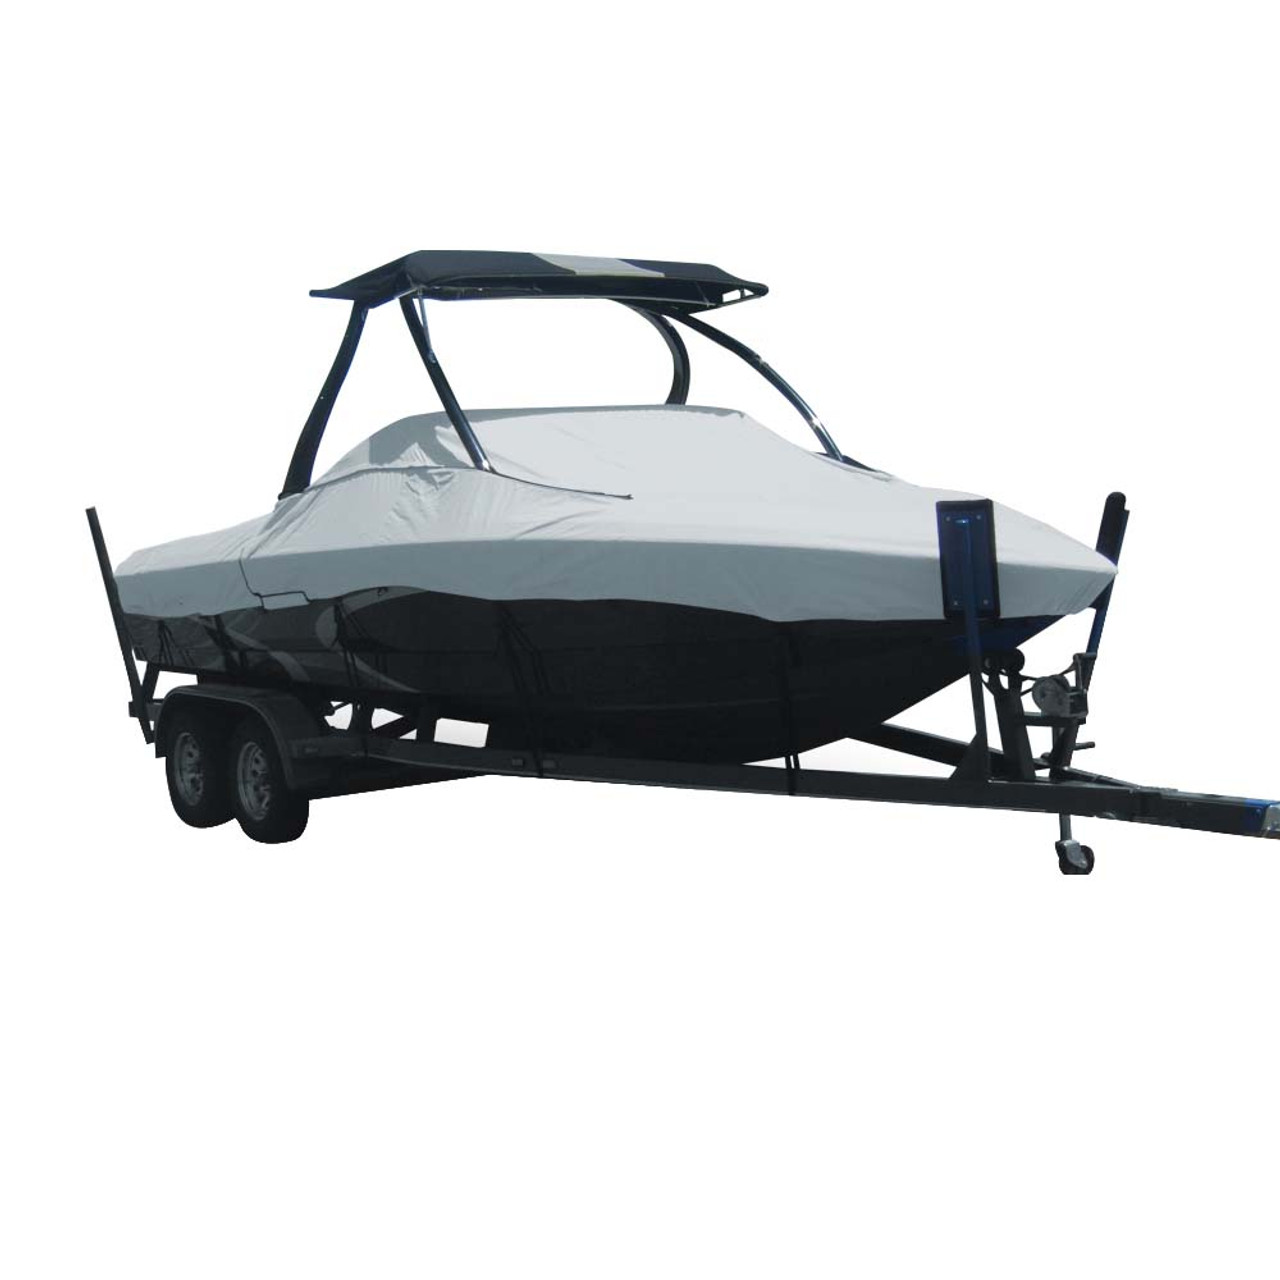 Carver Sun-DURA Specialty Boat Cover f\/21.5 Tournament Ski Boats w\/Tower - Grey [74521S-11]